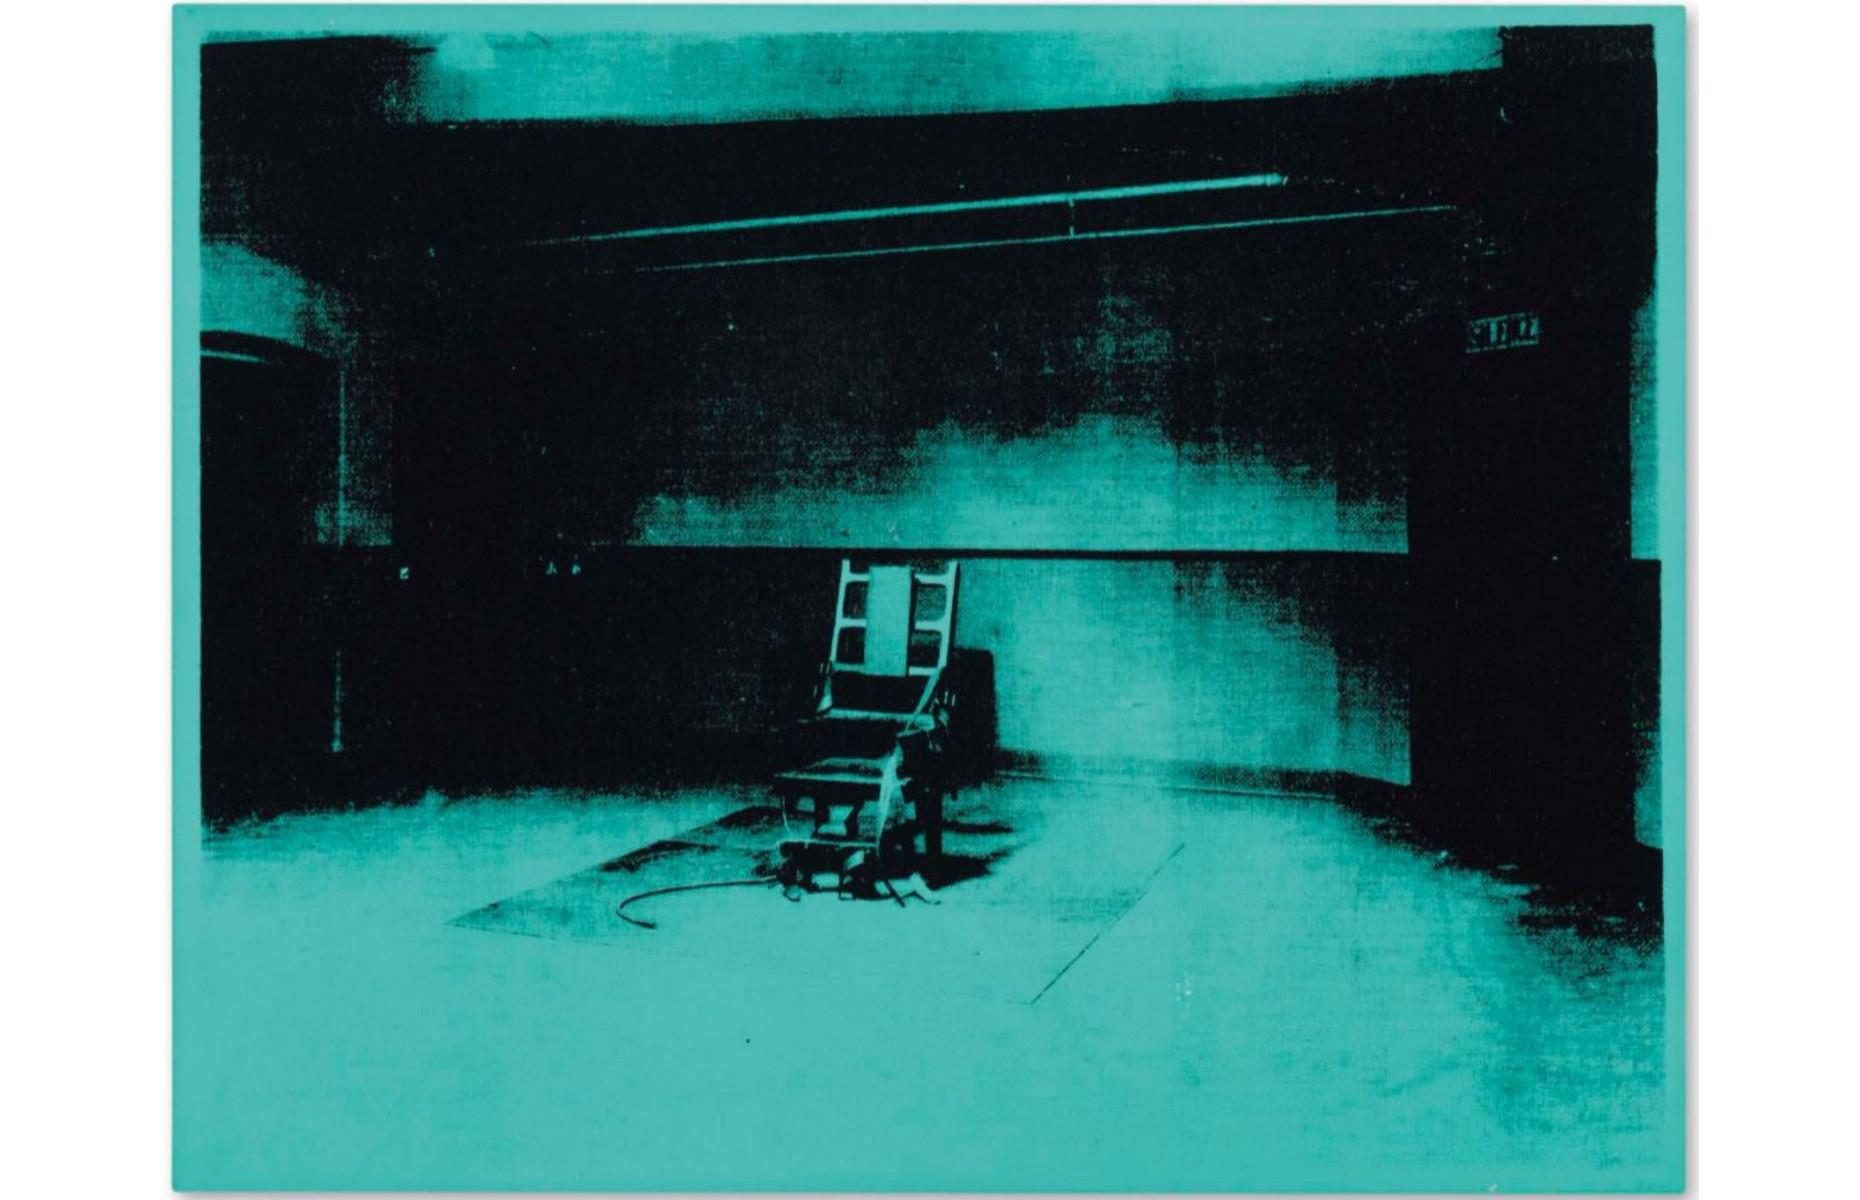 Andy Warhol's Little Electric Chair